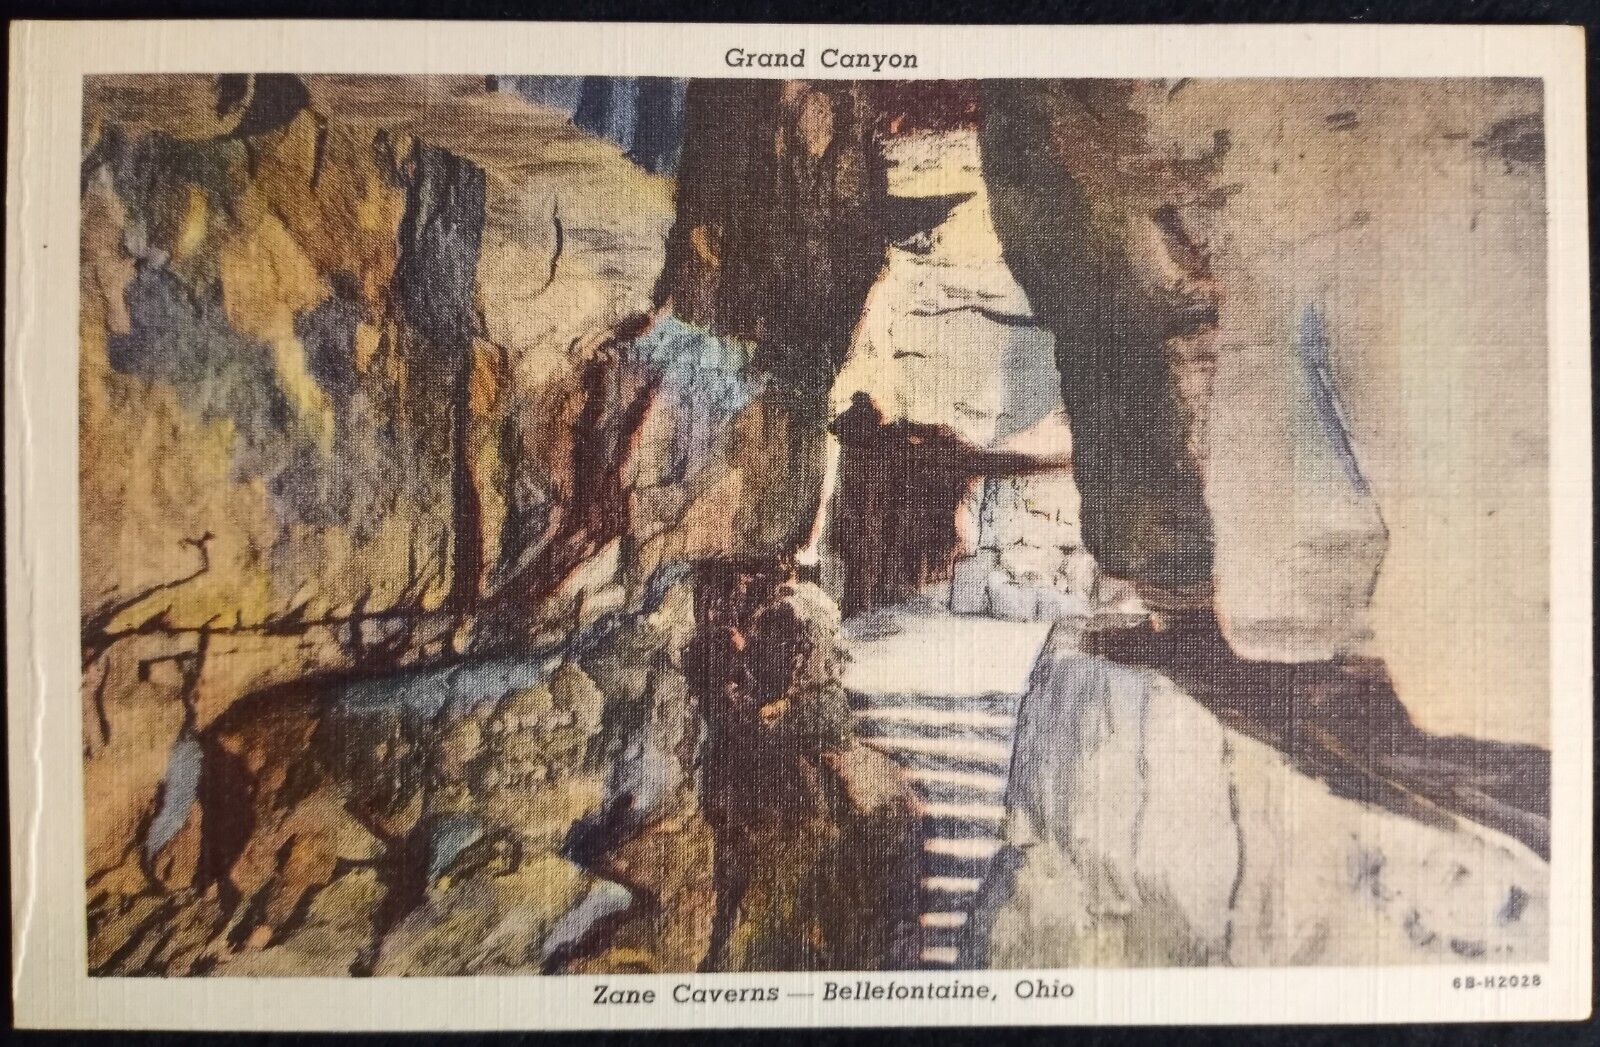 Bellefontaine Ohio OH Zane Caverns Cave Grand Canyon View c1940s Postcard A39